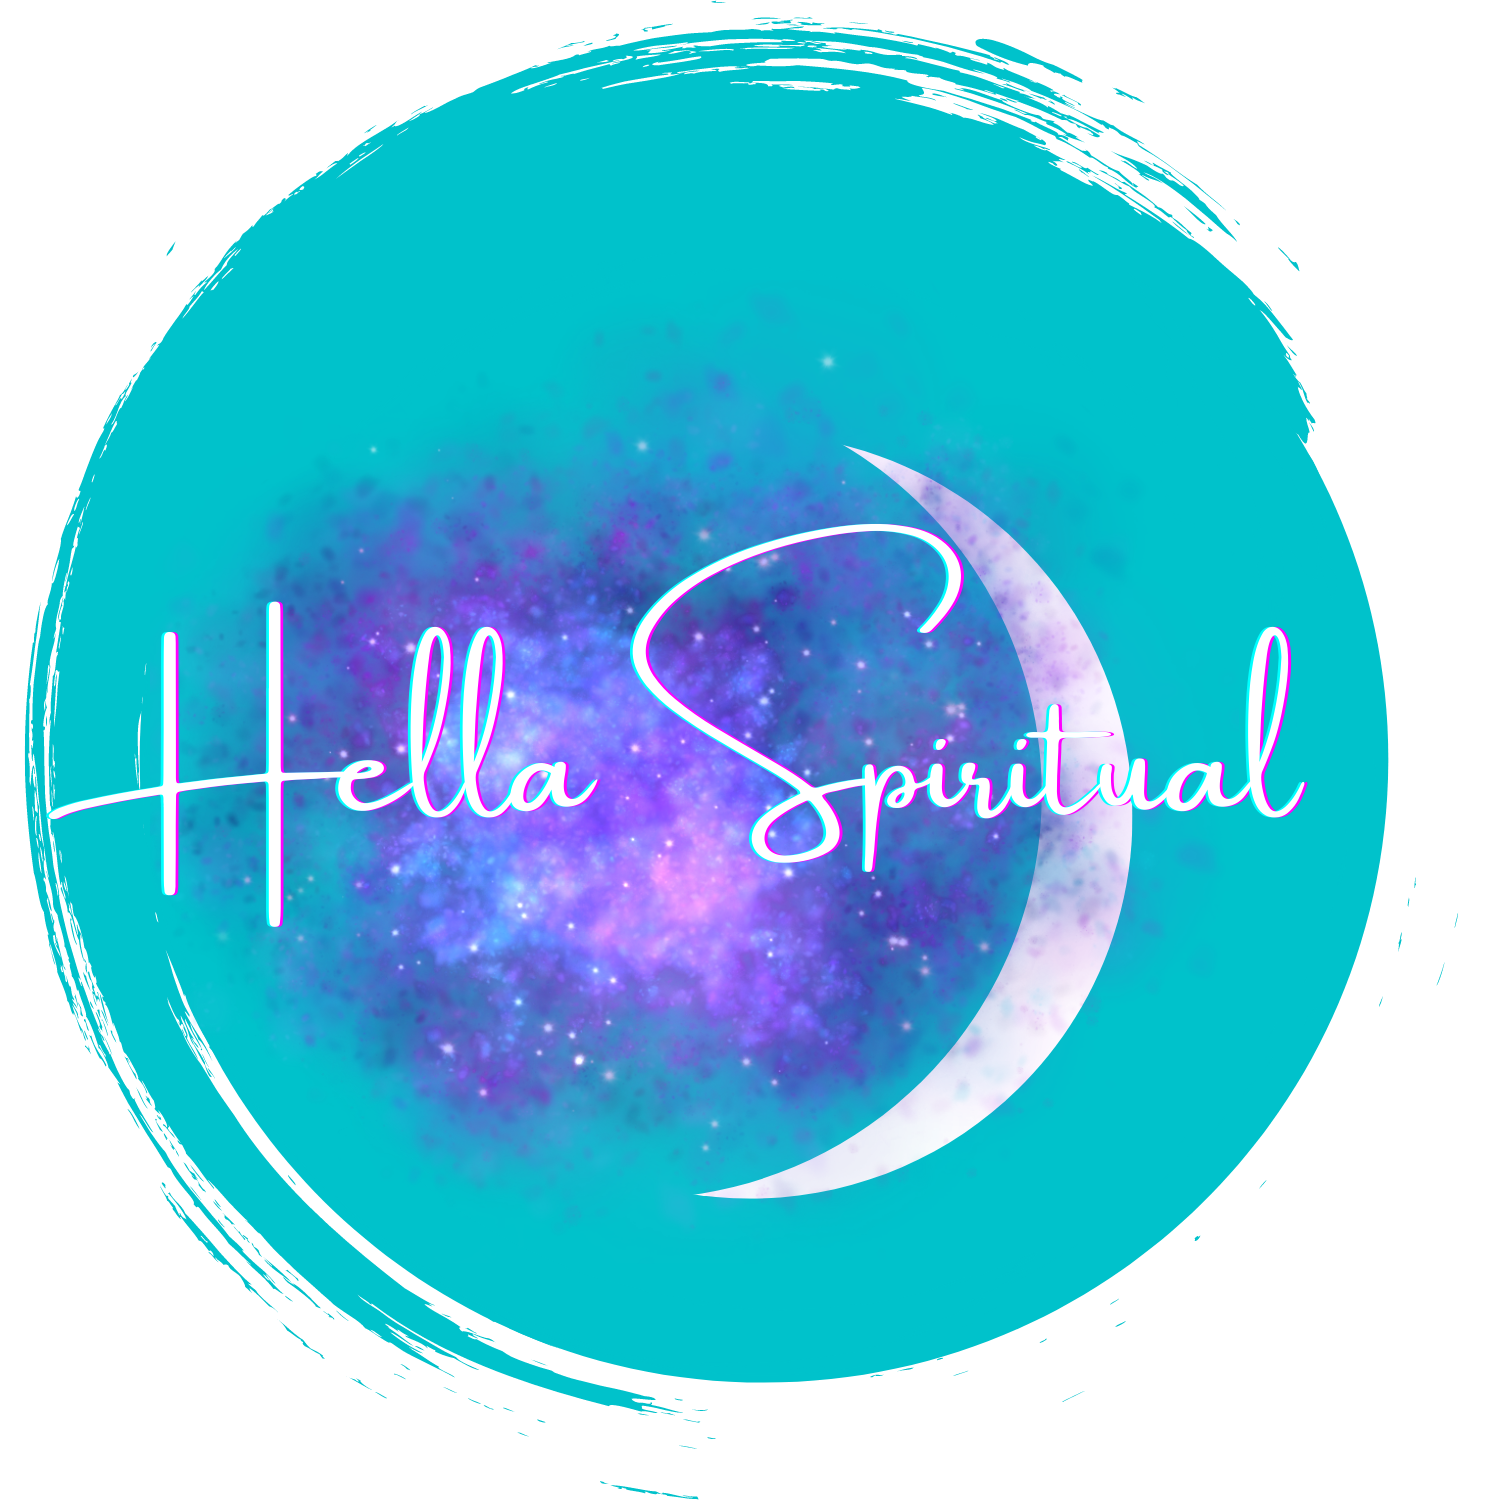 Hella Spiritual is a spiritual wellness and self-care company based out of Oakland, CA. We assist with cultivating spirituality through dreams, meditation, and trance. We are here to remind you that you are a spiritual being and you are intuitive. Peace!